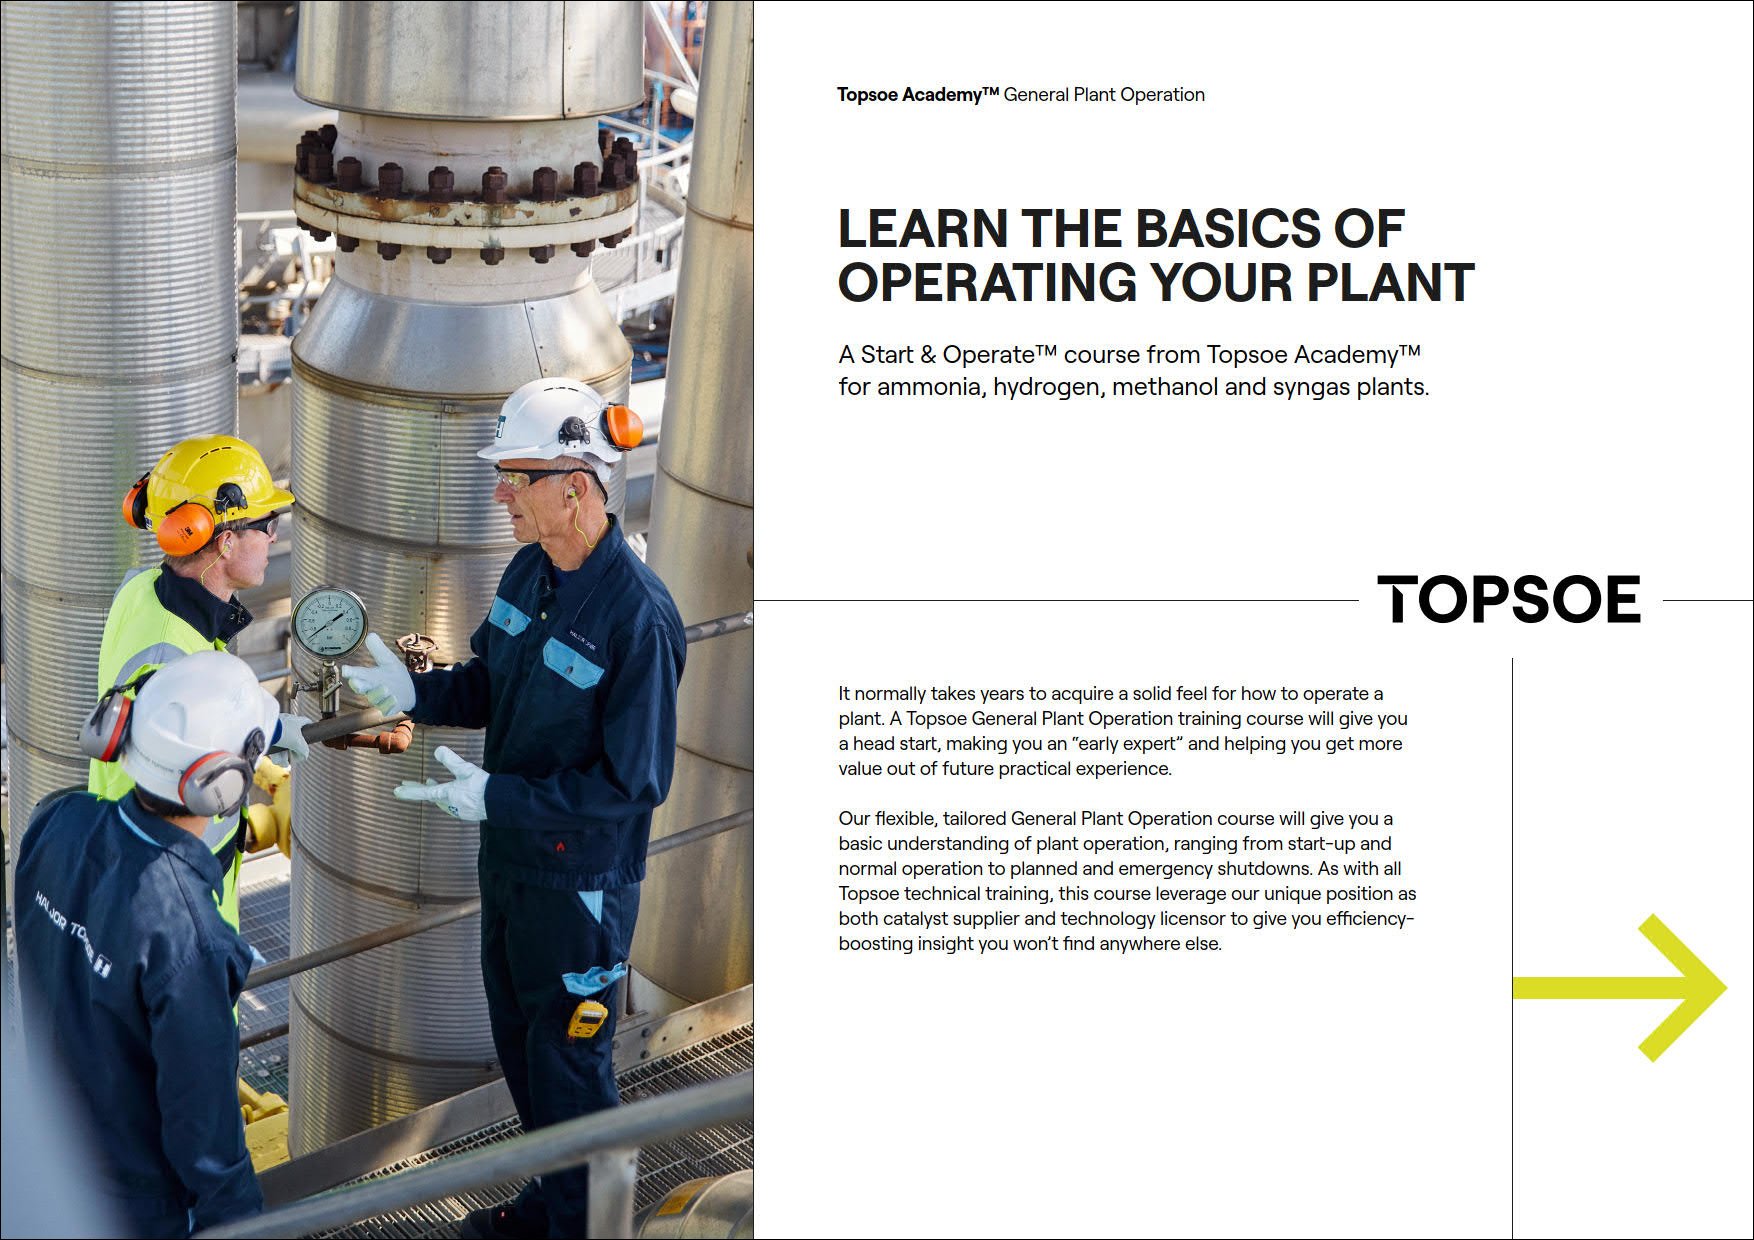 Learn the basics of operating your plant